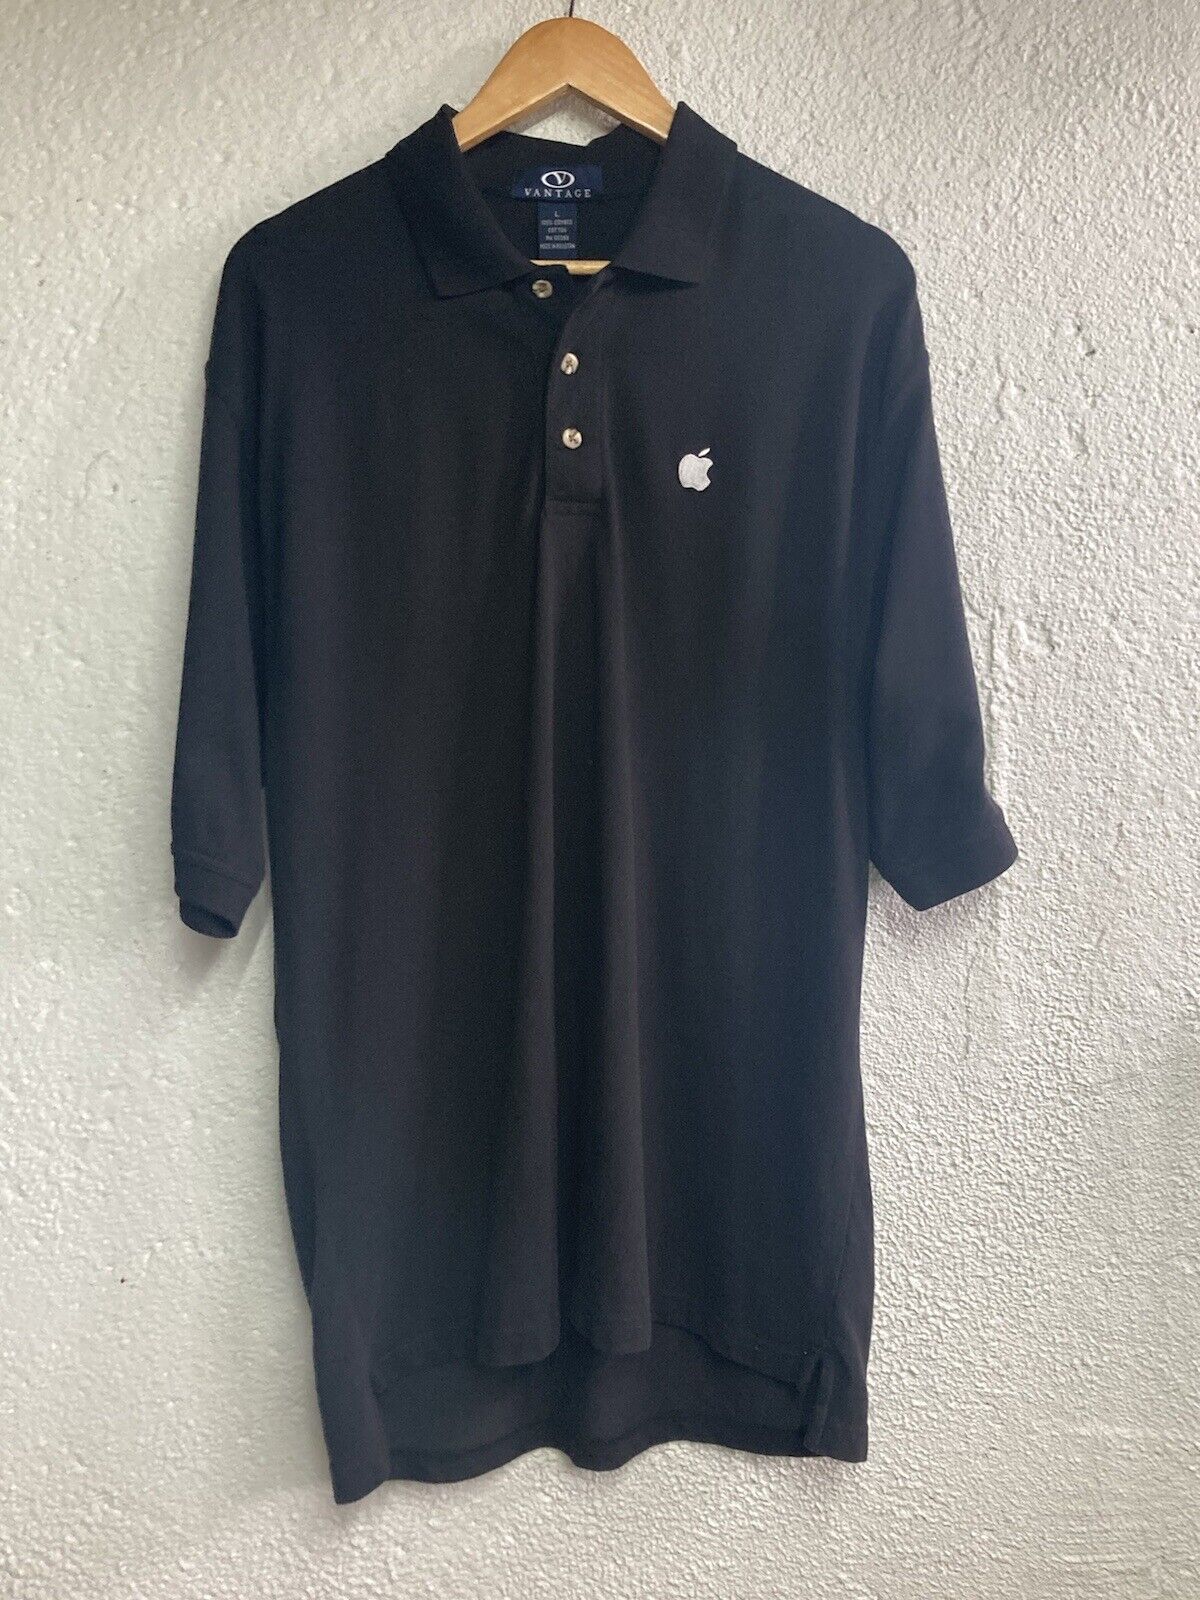 Vtg Apple Computer Front Desk Work Polo Shirt with White Apple Logo Size XL 90s